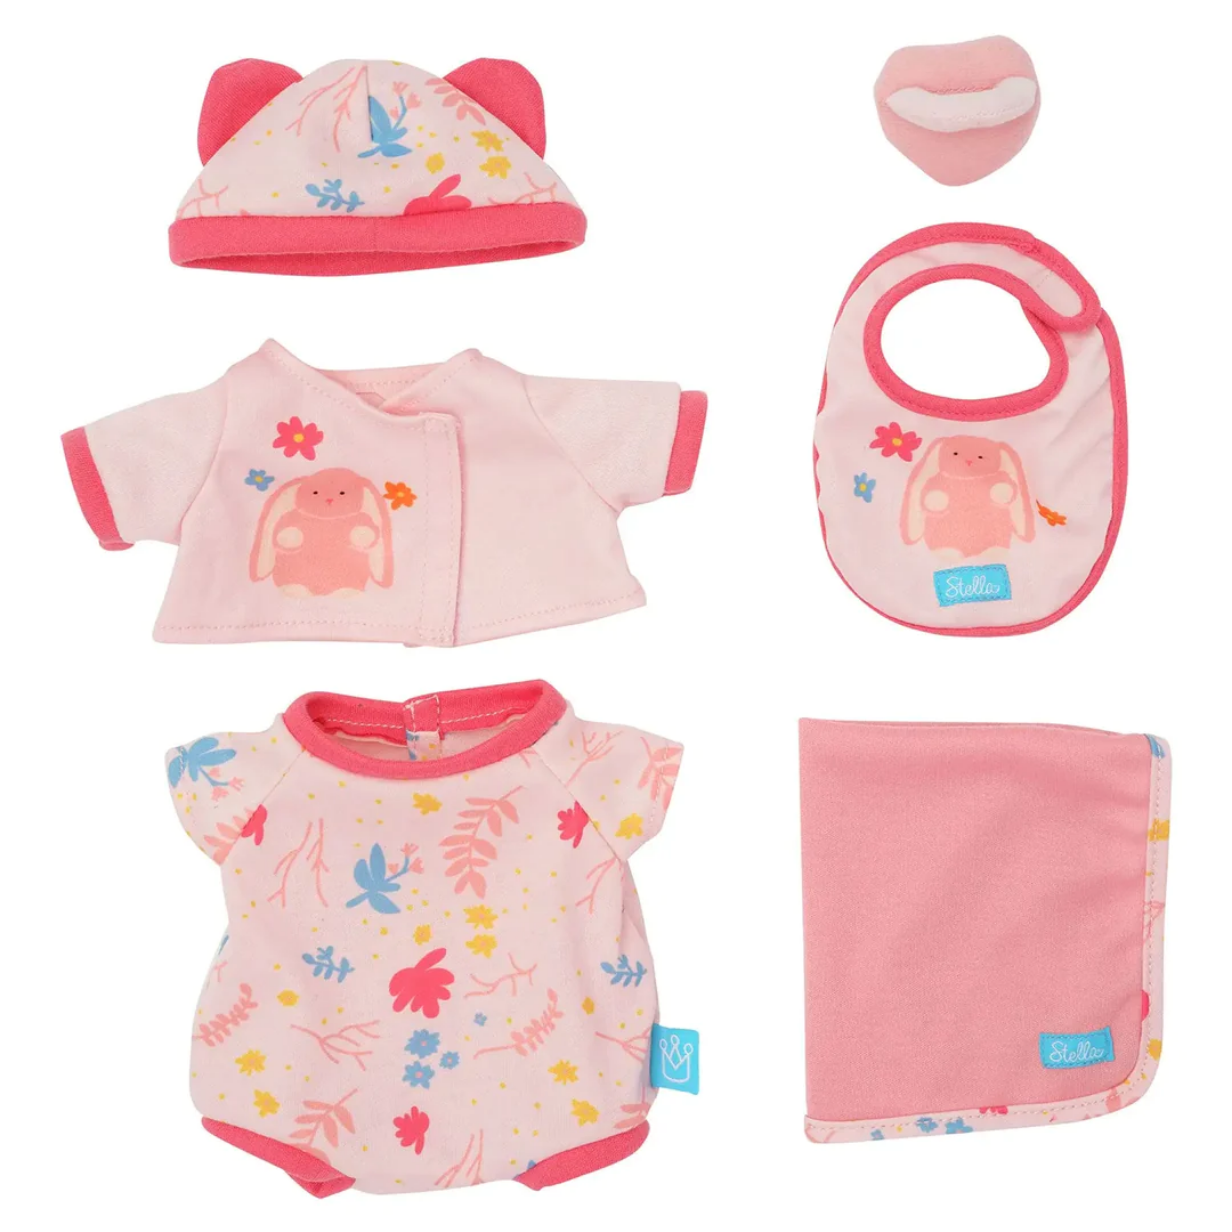 Baby Stella Welcome Home Baby Accessory Set